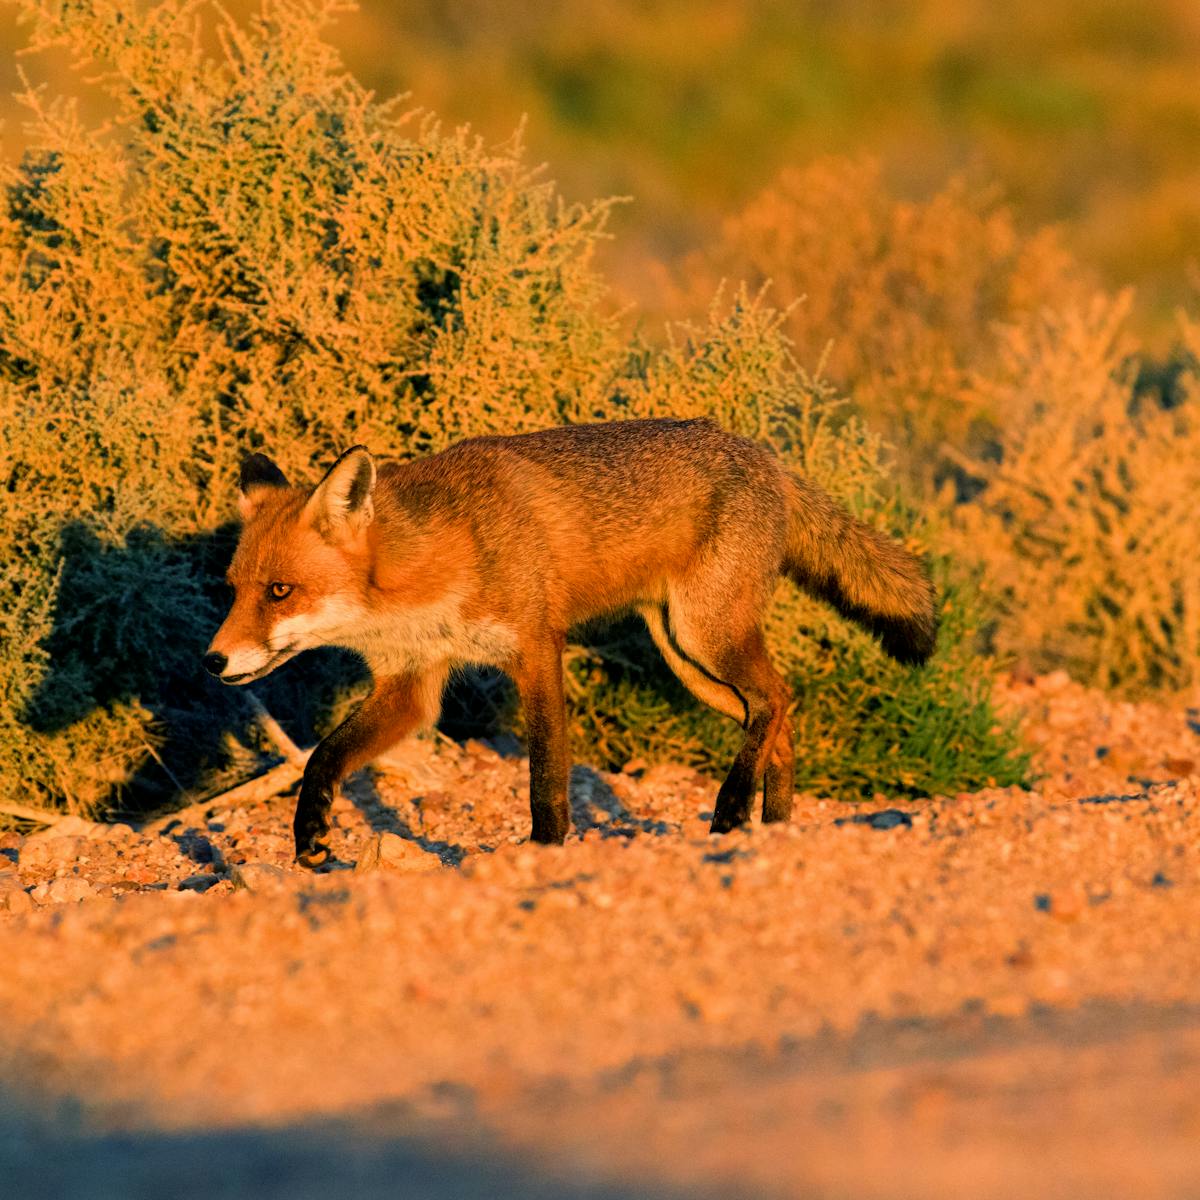  million foxes, 300 million native animals killed every year: now we  know the damage foxes wreak